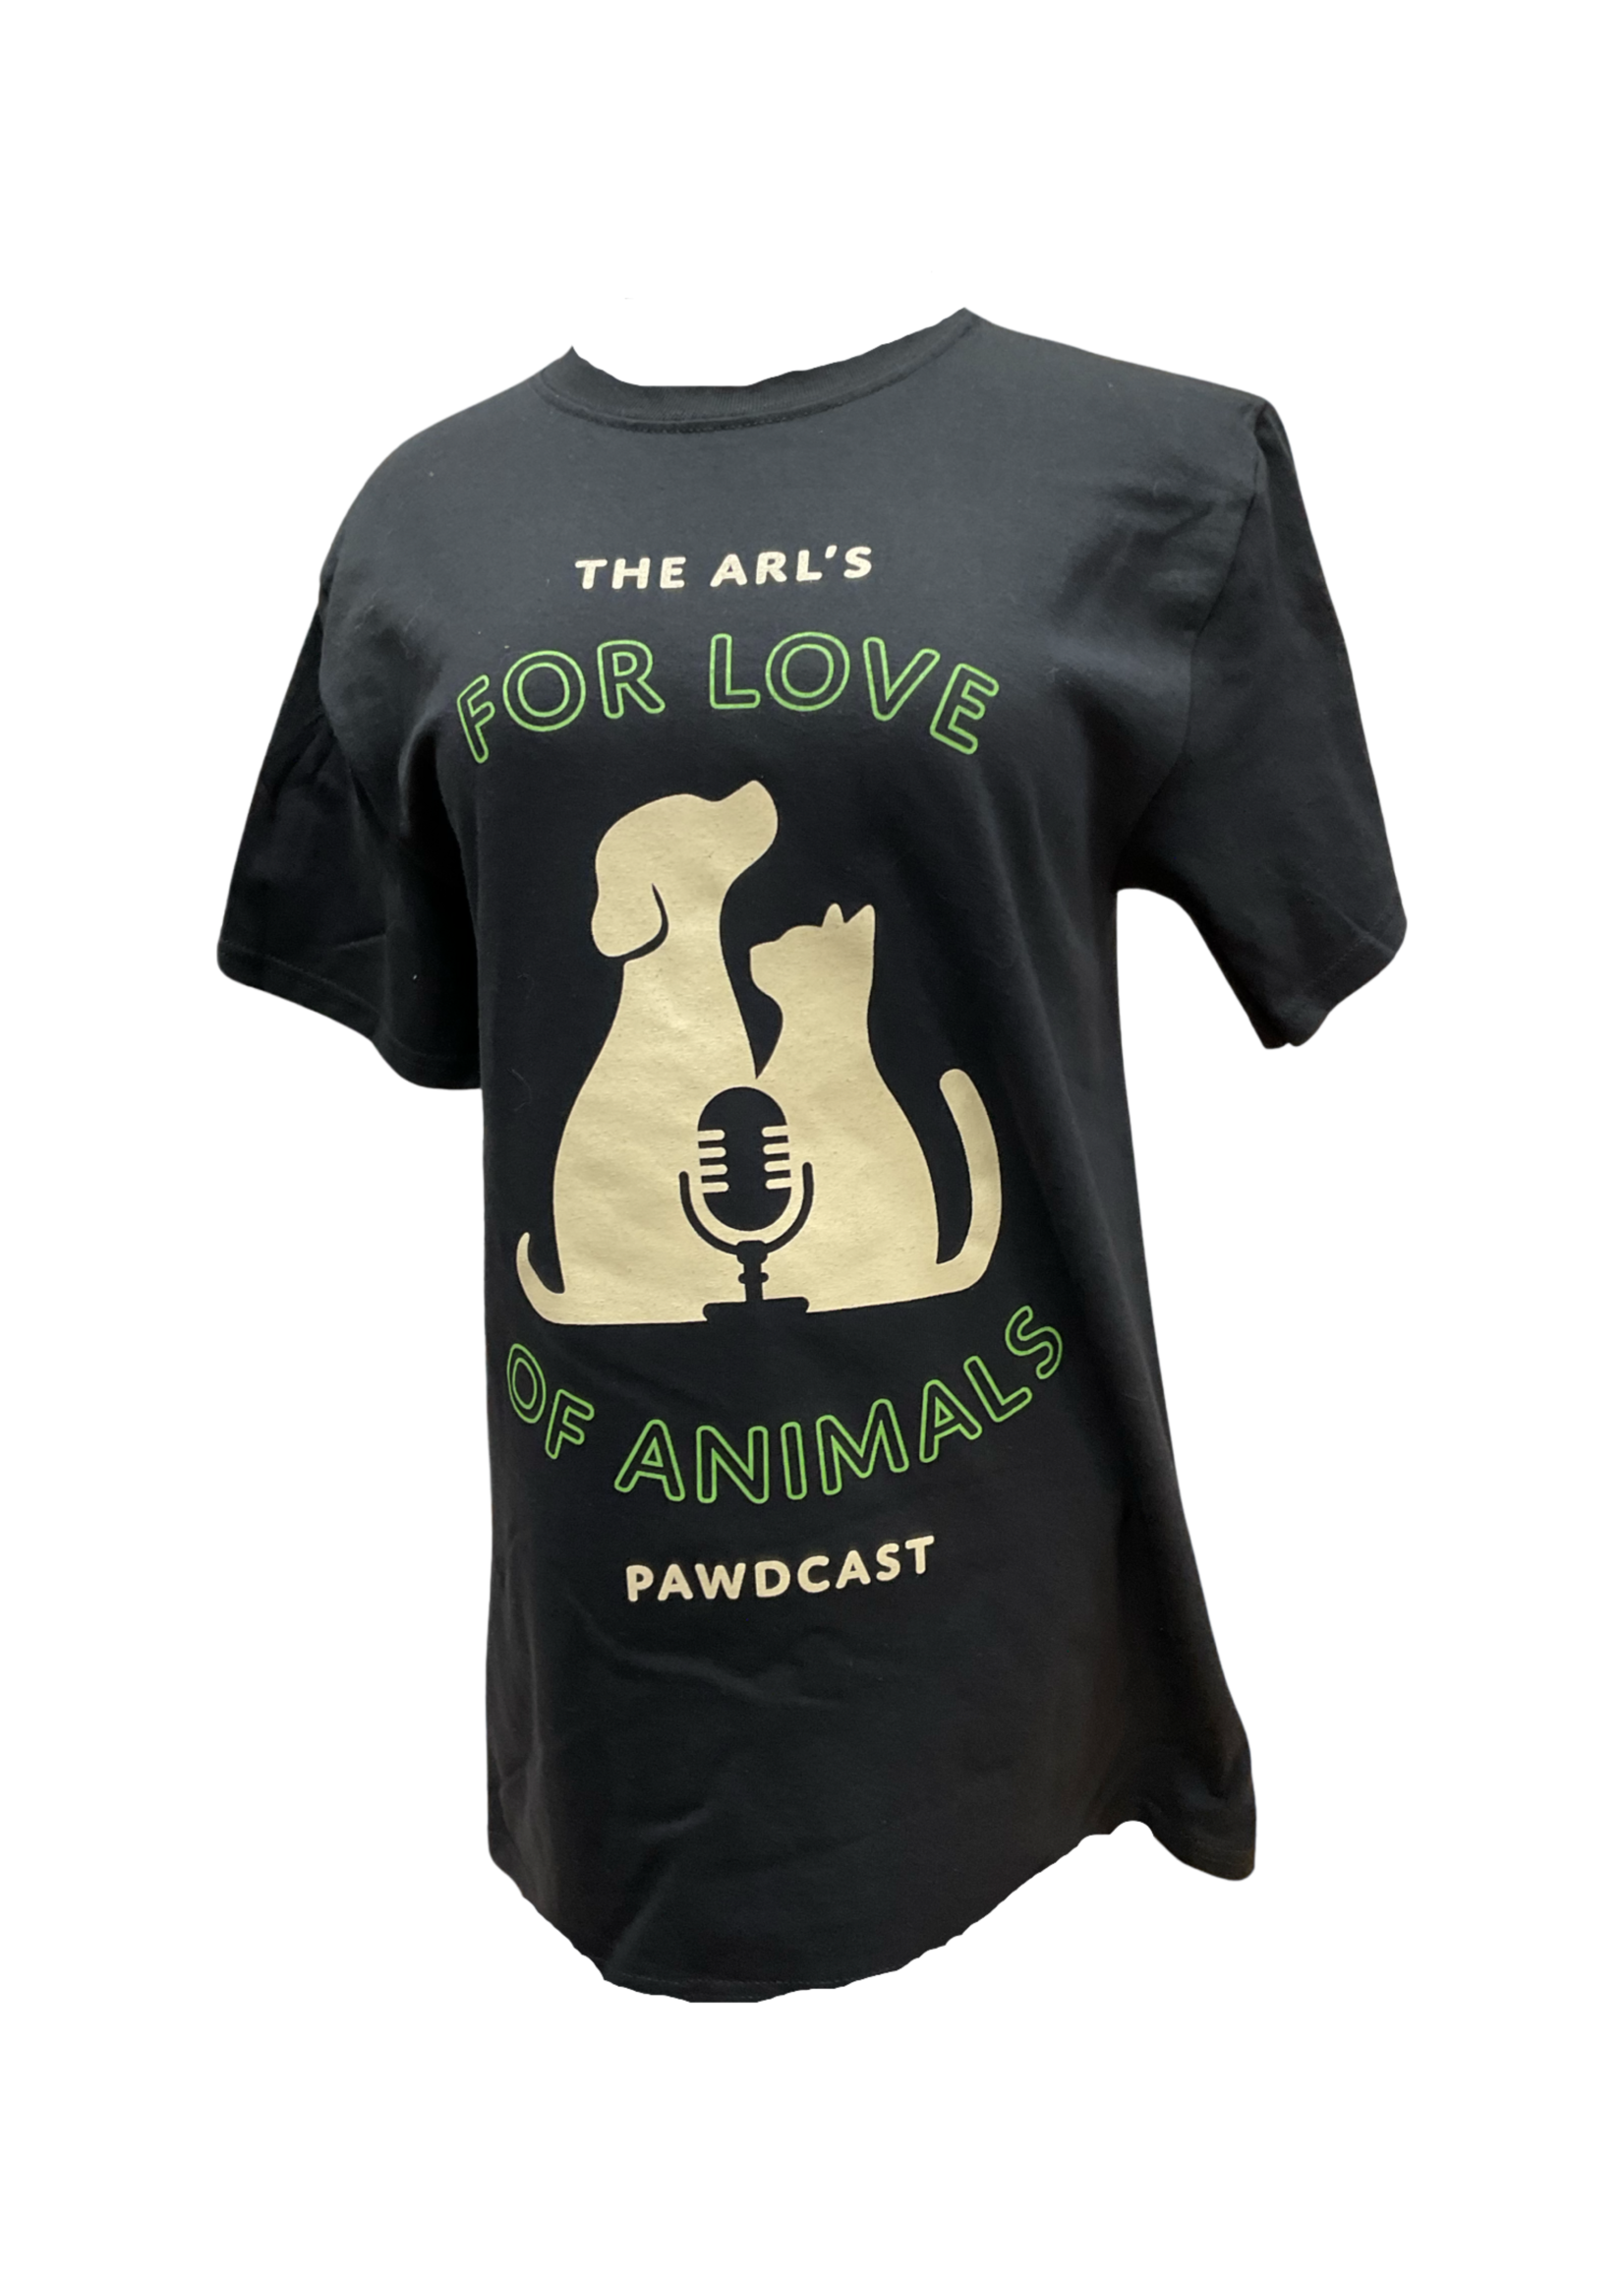 For Love of Animals Pawdcast T-Shirt